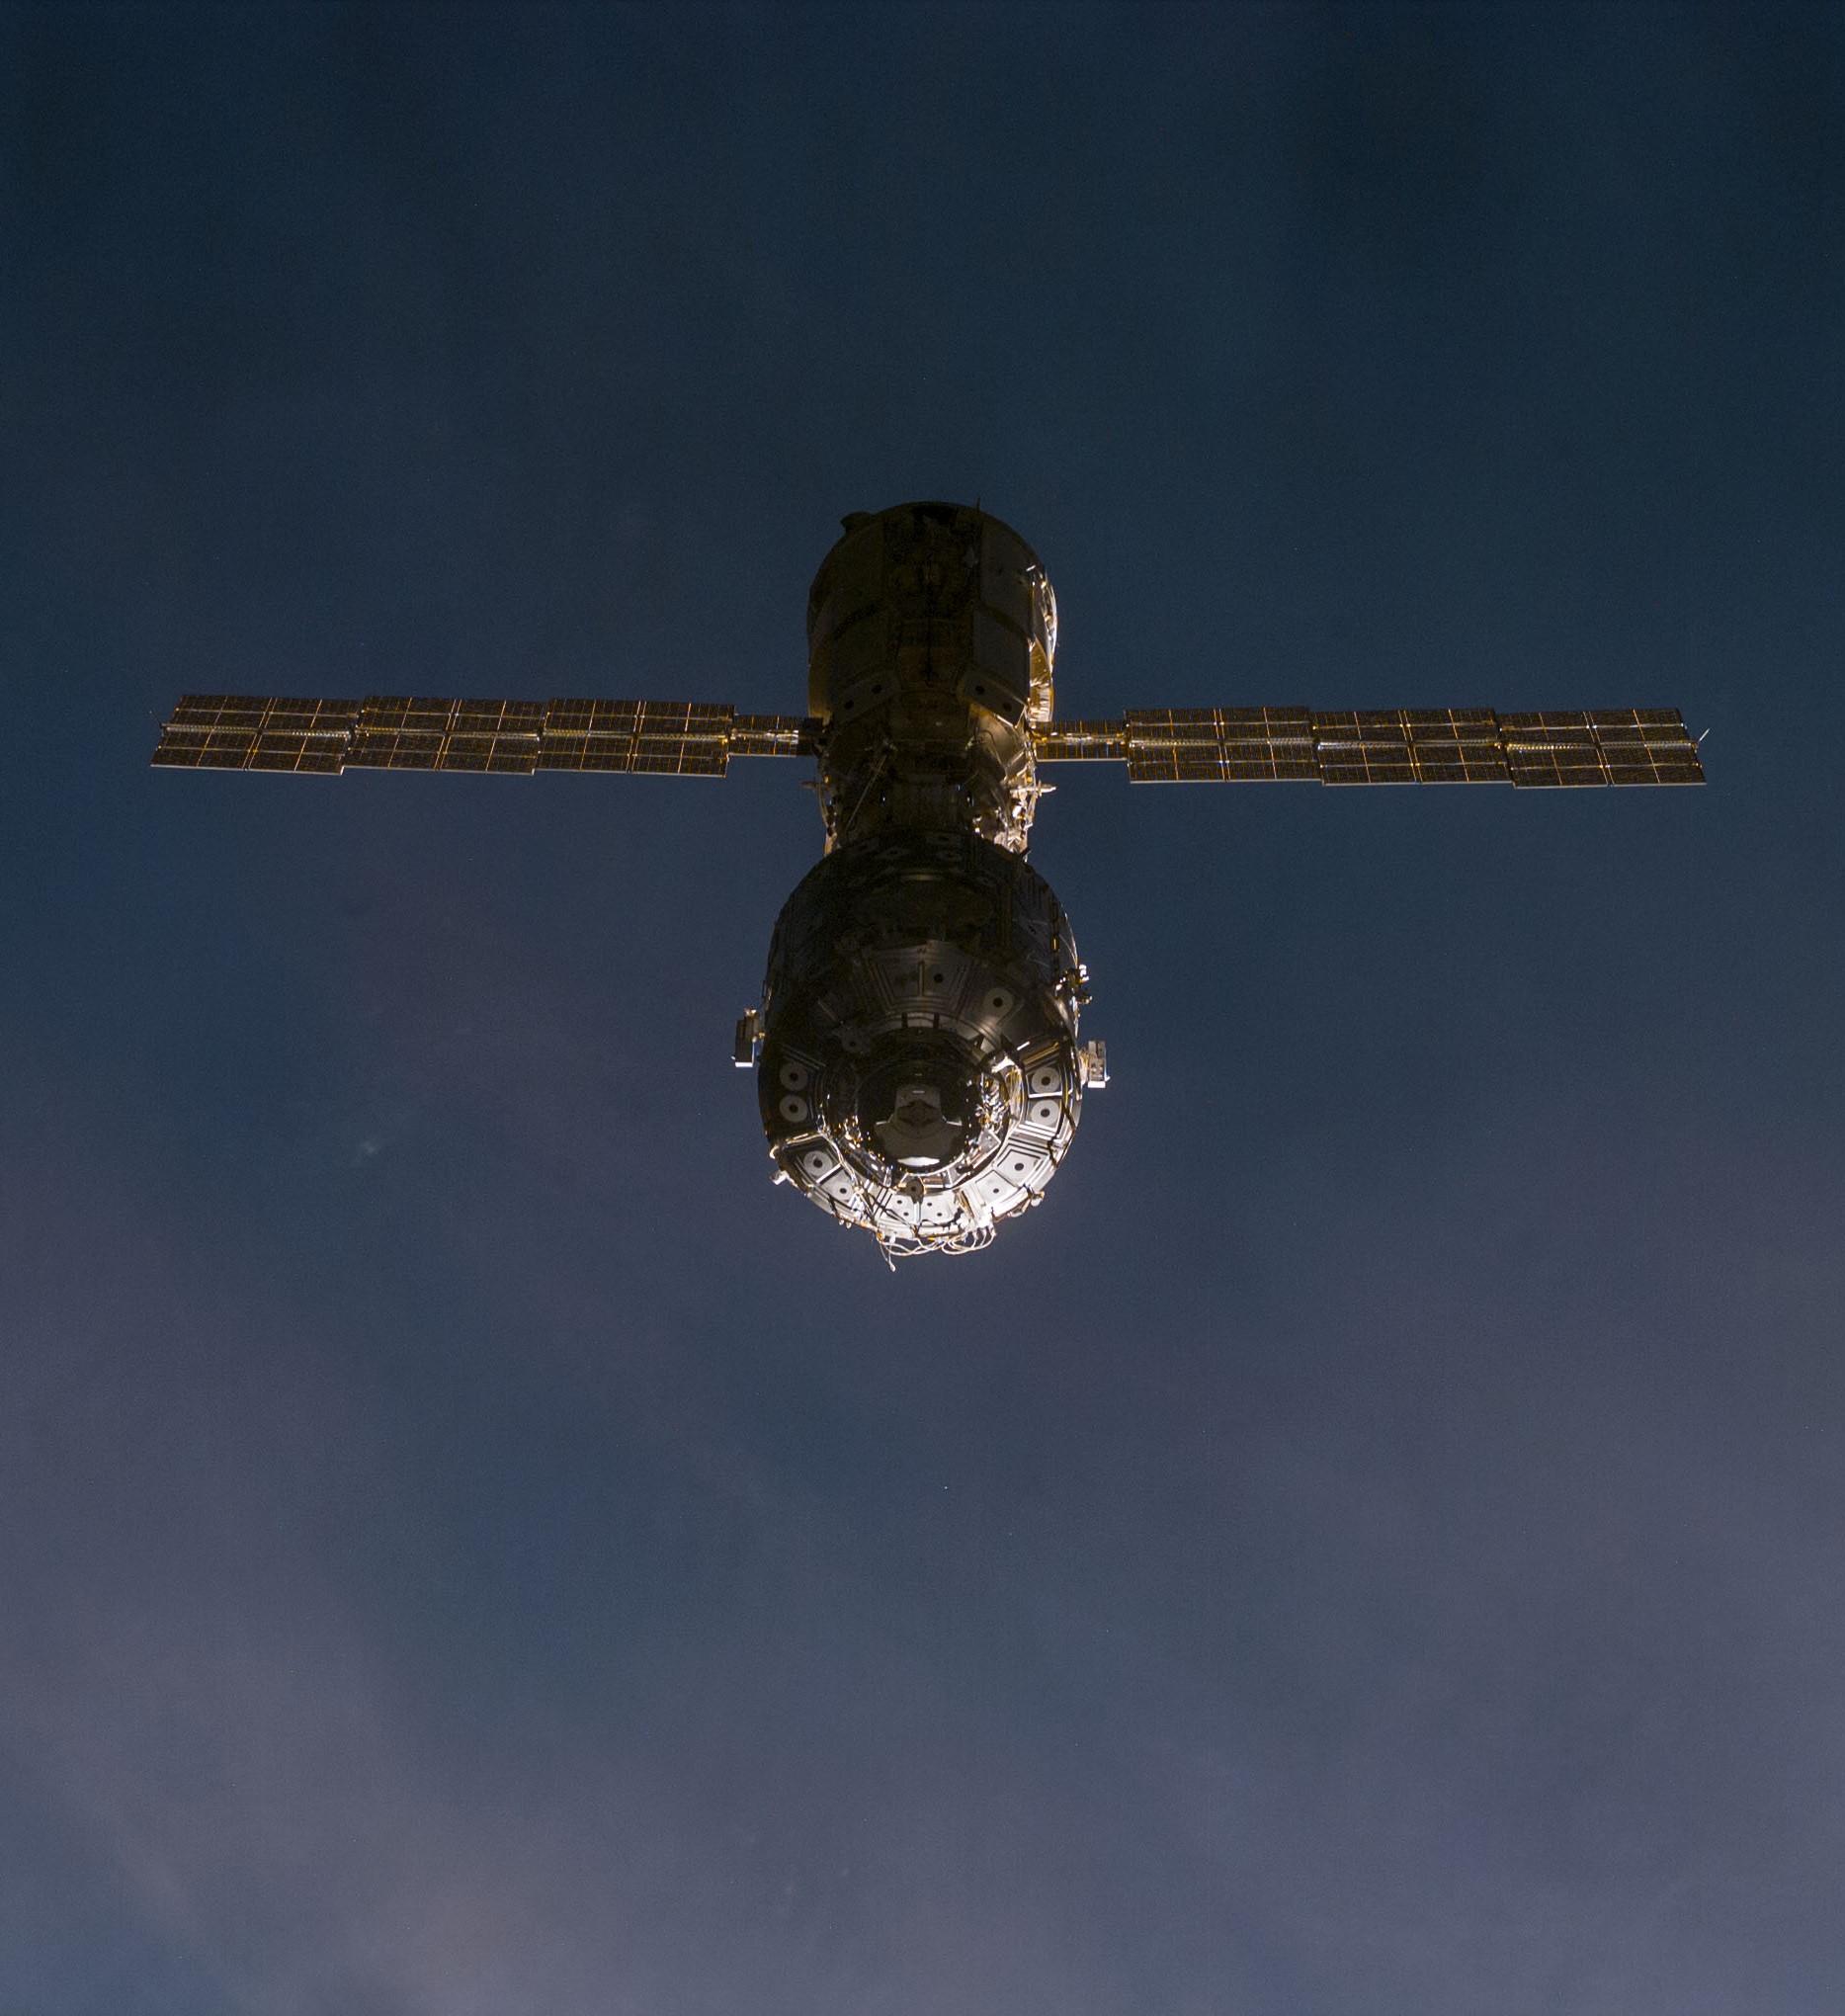 View of the International Space Station from Discovery during the rendezvous maneuver.